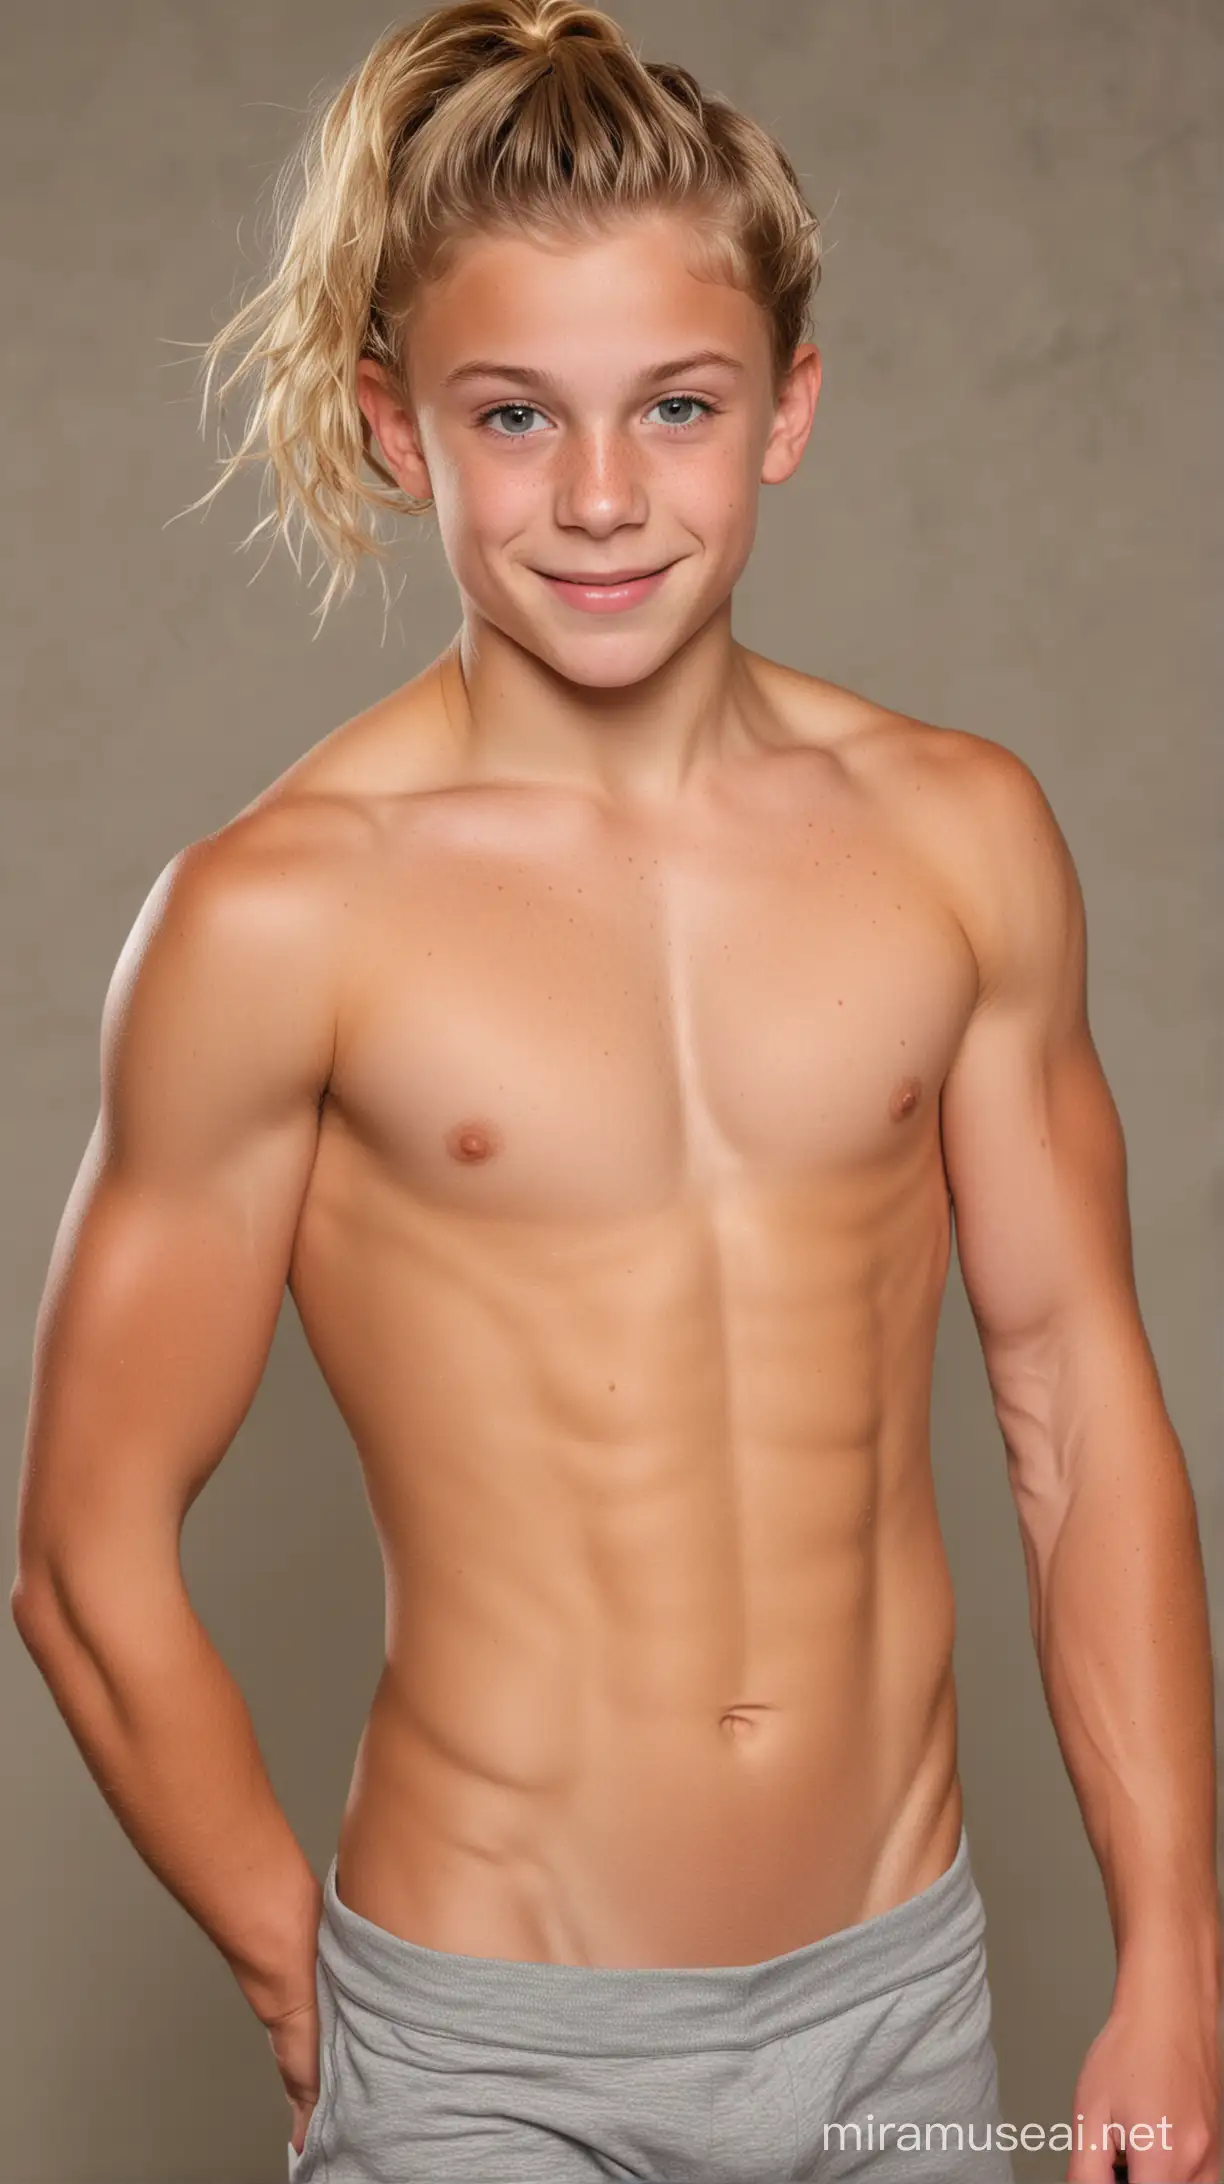 Shirtless 12yo tween gymnast. Huge muscular pecs. wide lats. Flexing big muscular biceps. triceps. muscular sixpack washboard abs. Shirtless. Quads. obliques. glutes. Facefreckles. Gold blonde wavey hair. Tanned.